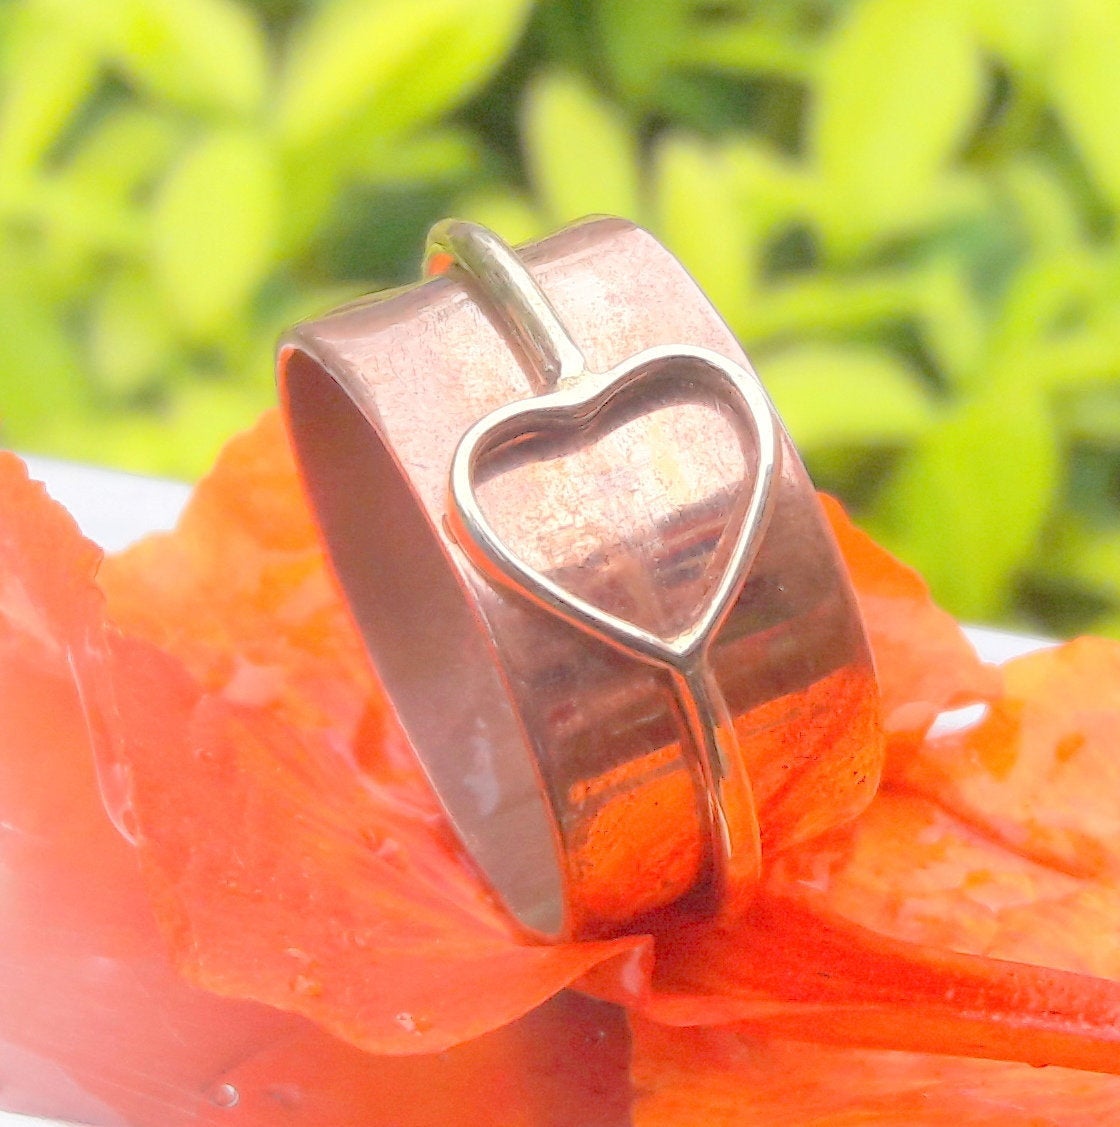 Heart Ring, Handmade Heart, Joint Heart, Heart On Band, Copper Jewelry, Women's Ring, Wide Band Ring, Copper Color Band Ring, Gift For